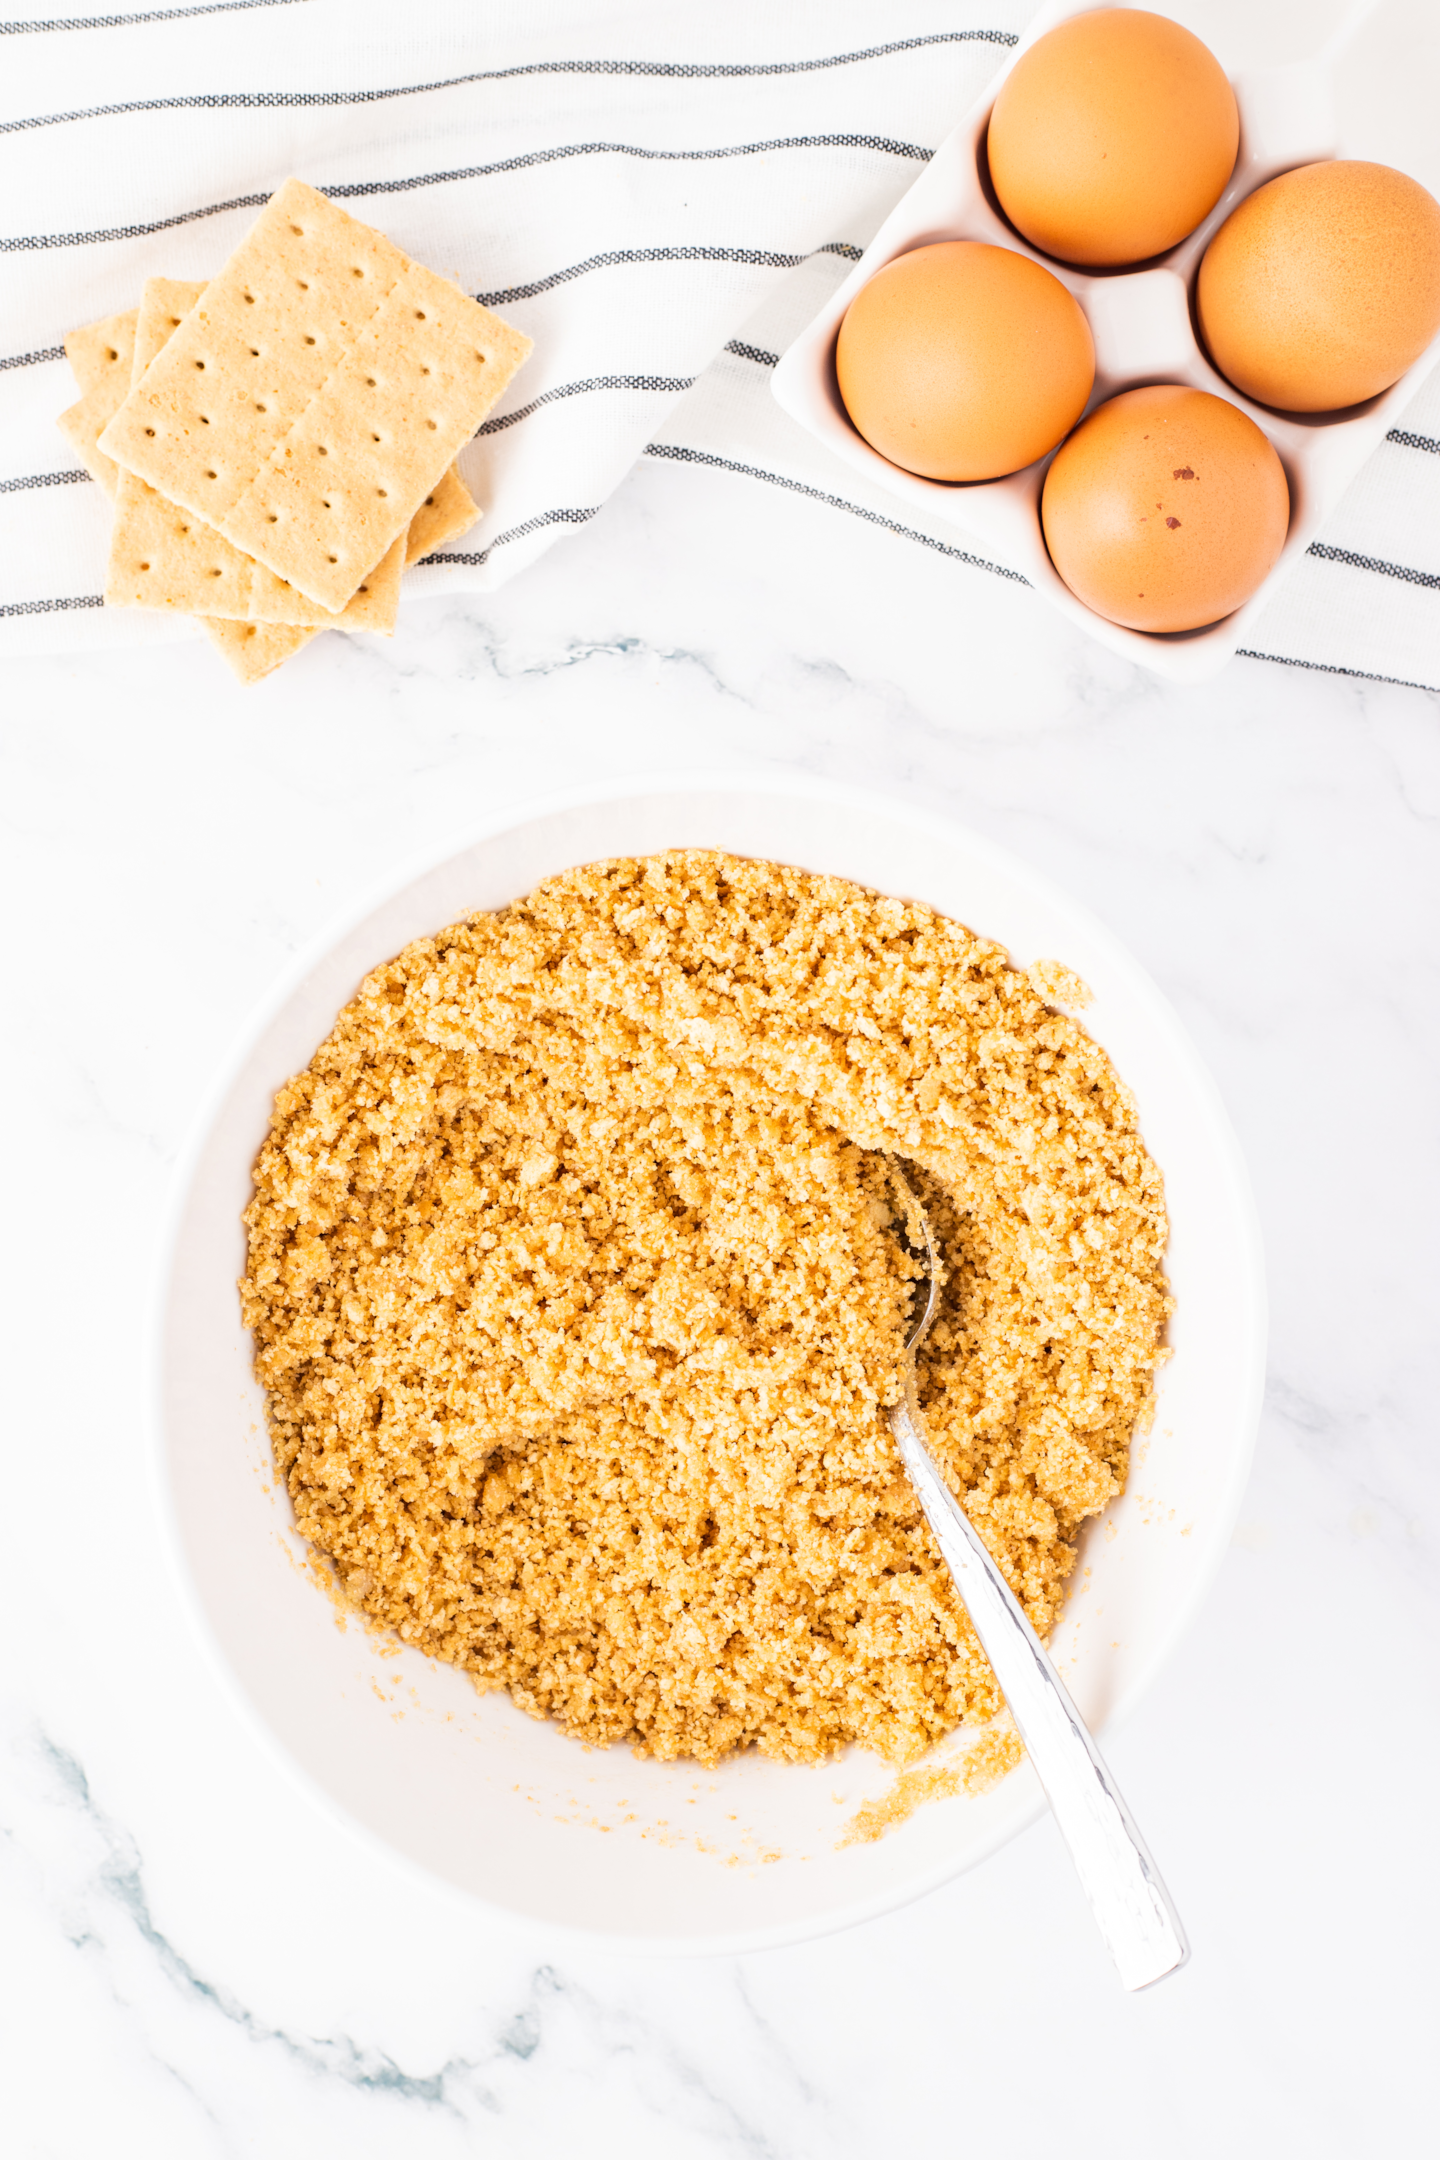 graham cracker crust mixture in a bowl with a spoon